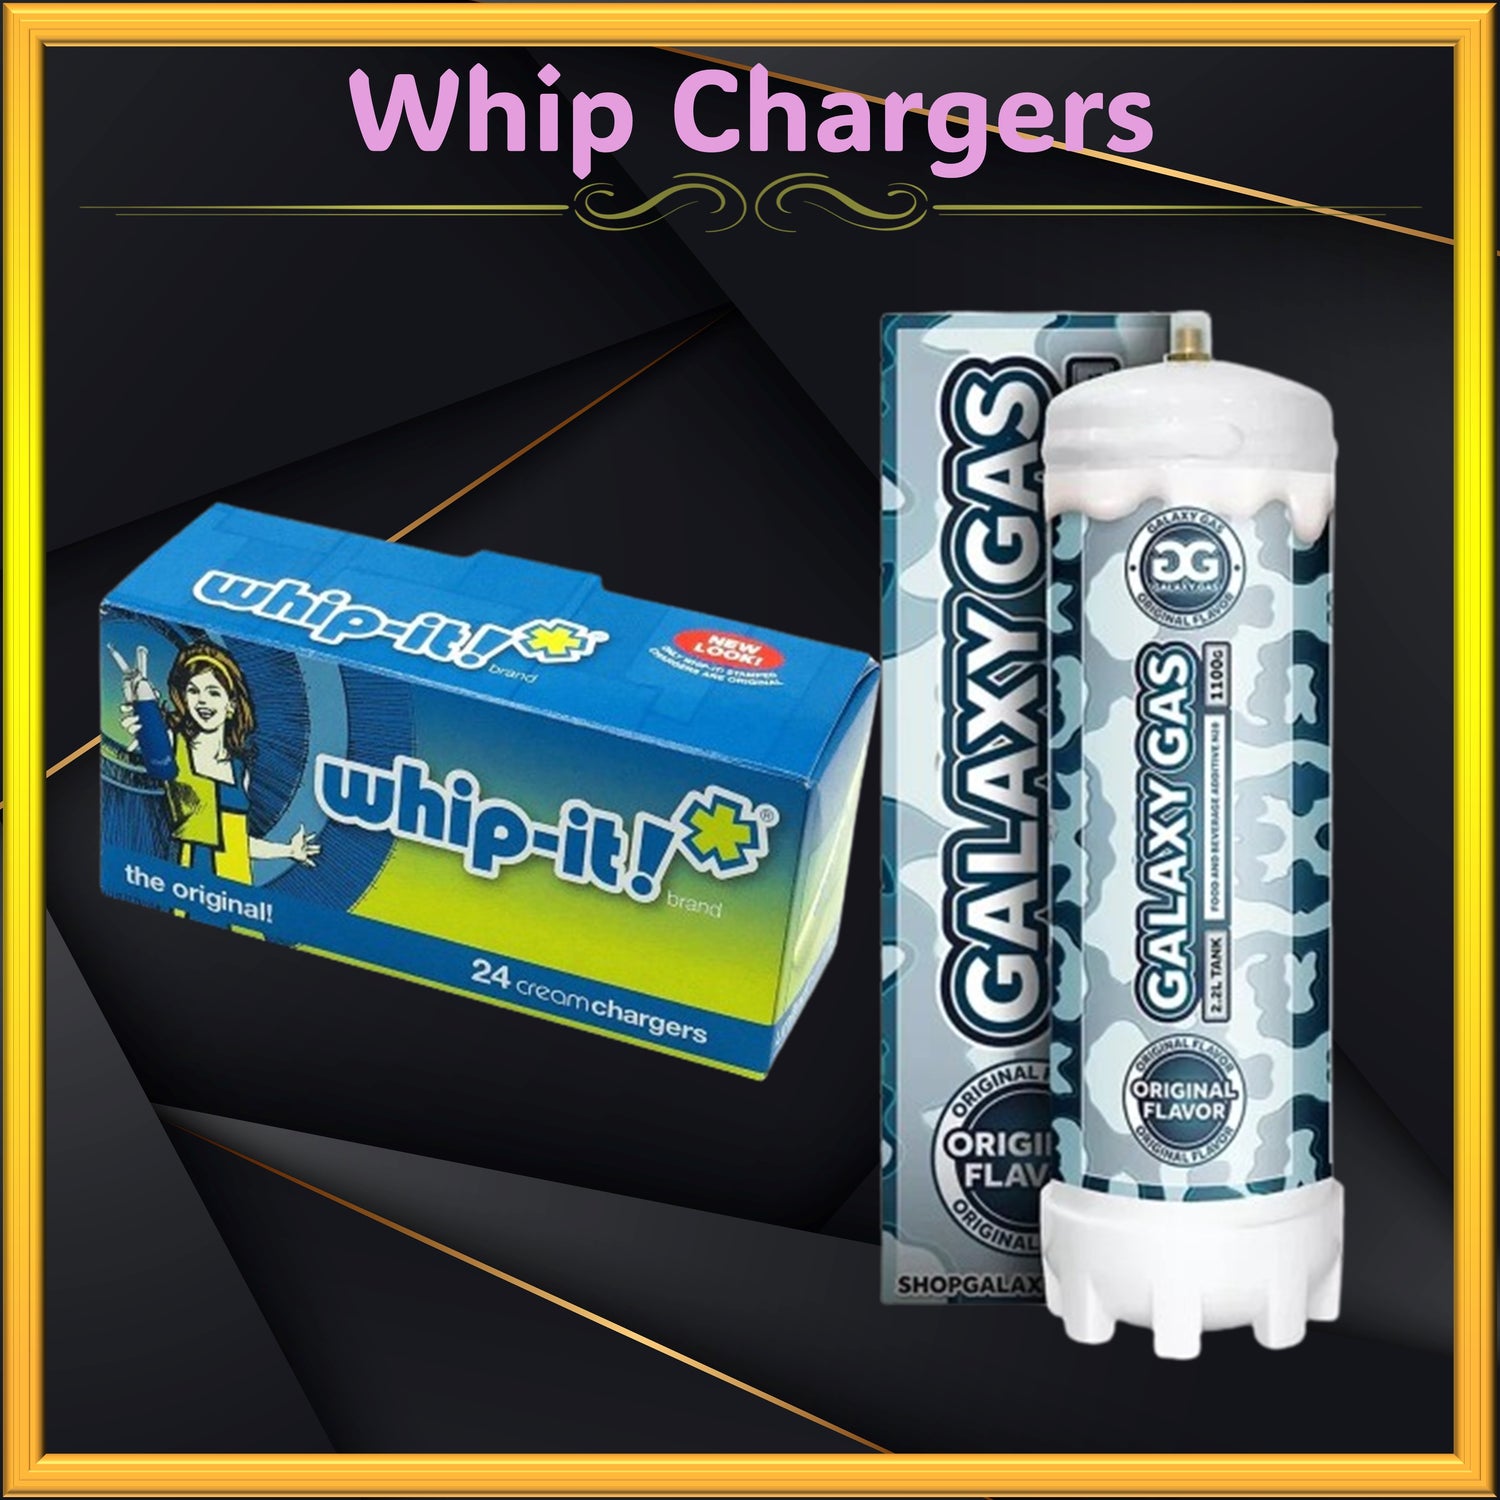 Whip Chargers